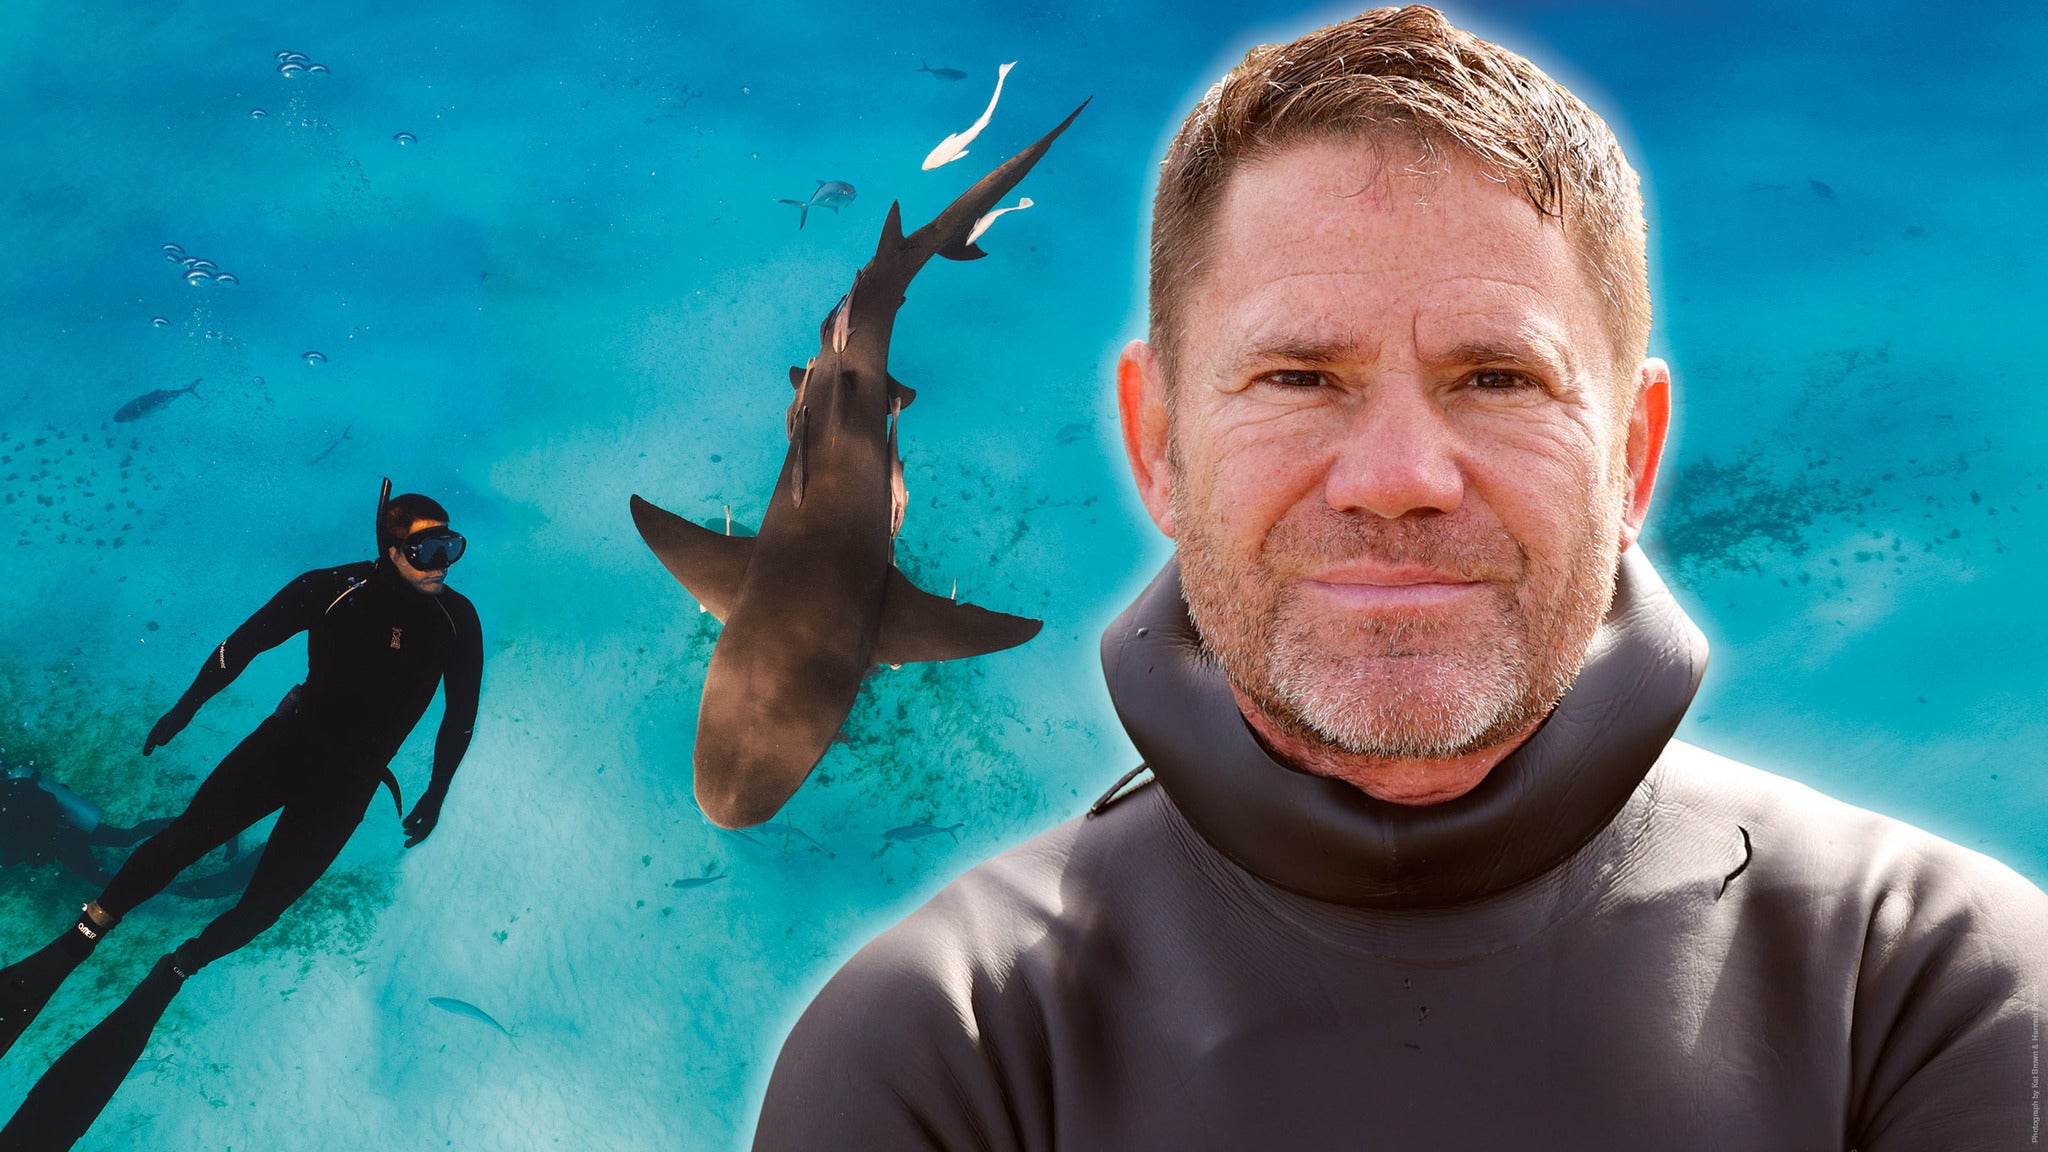 Image used with permission from Ticketmaster | Steve Backshall tickets